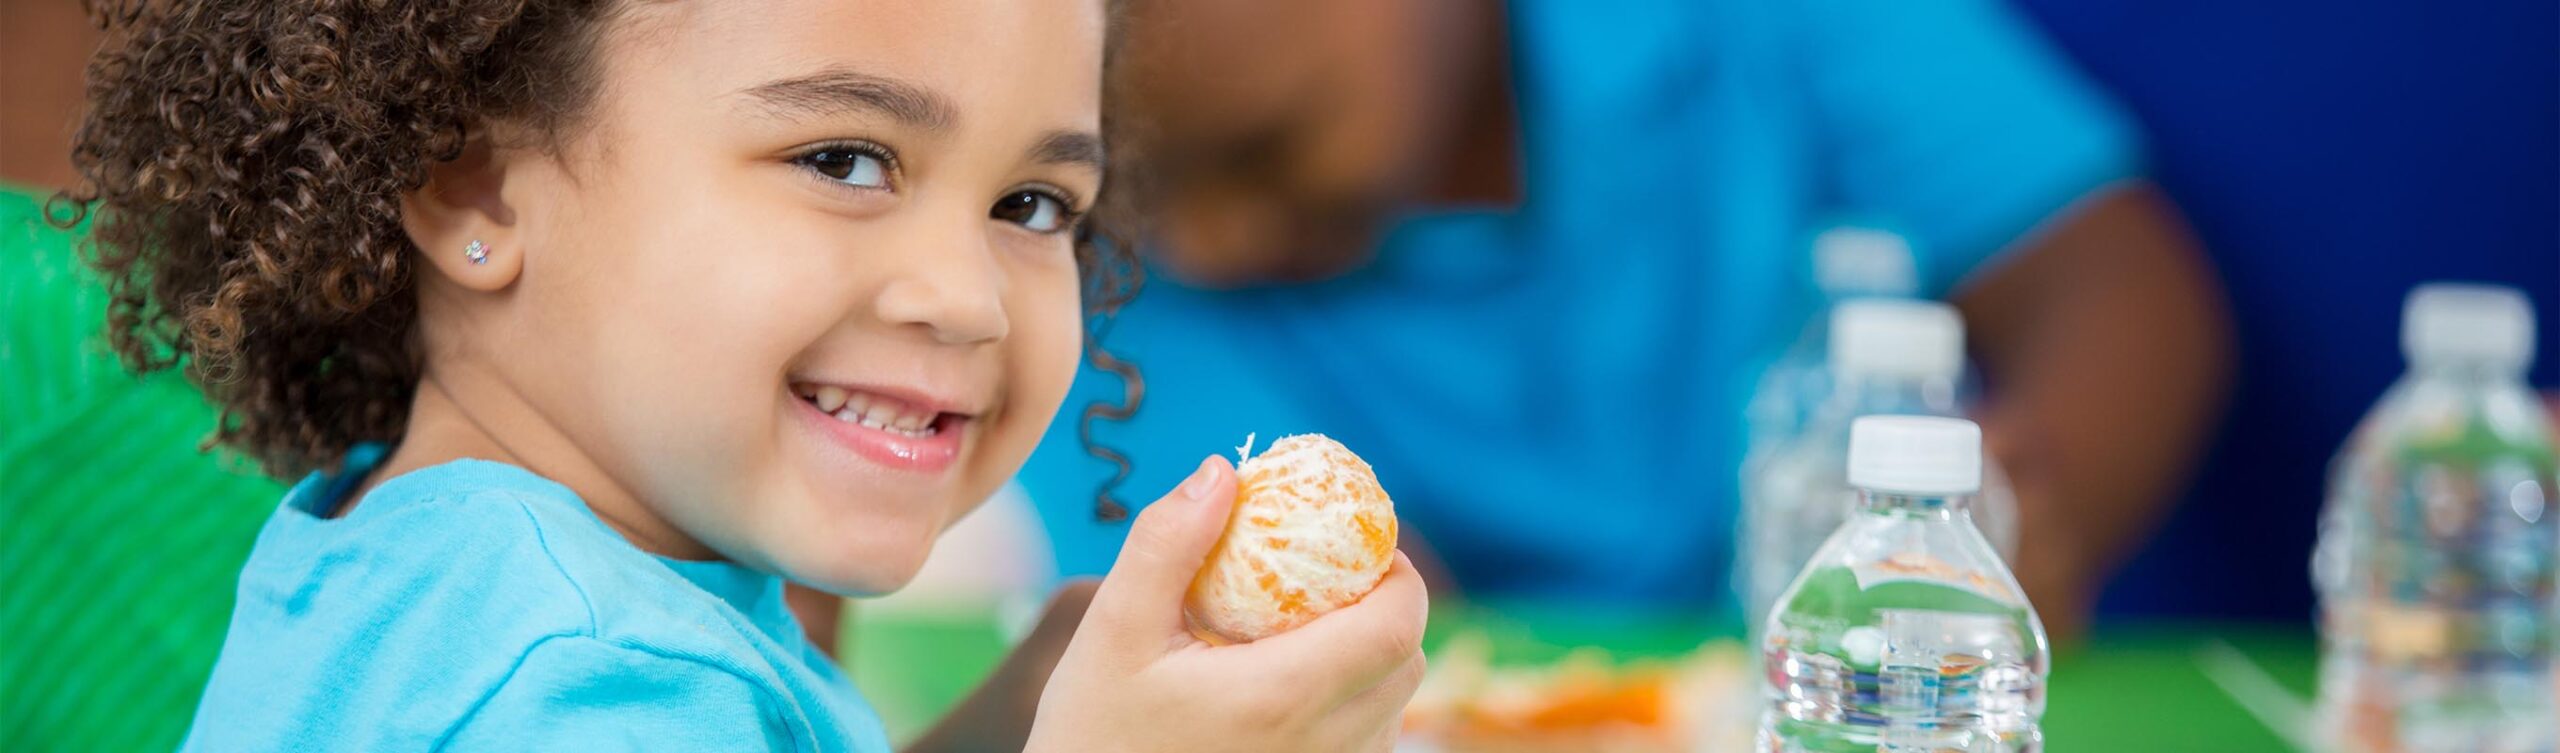 Childcare Network provides each student with healthy meals every day.